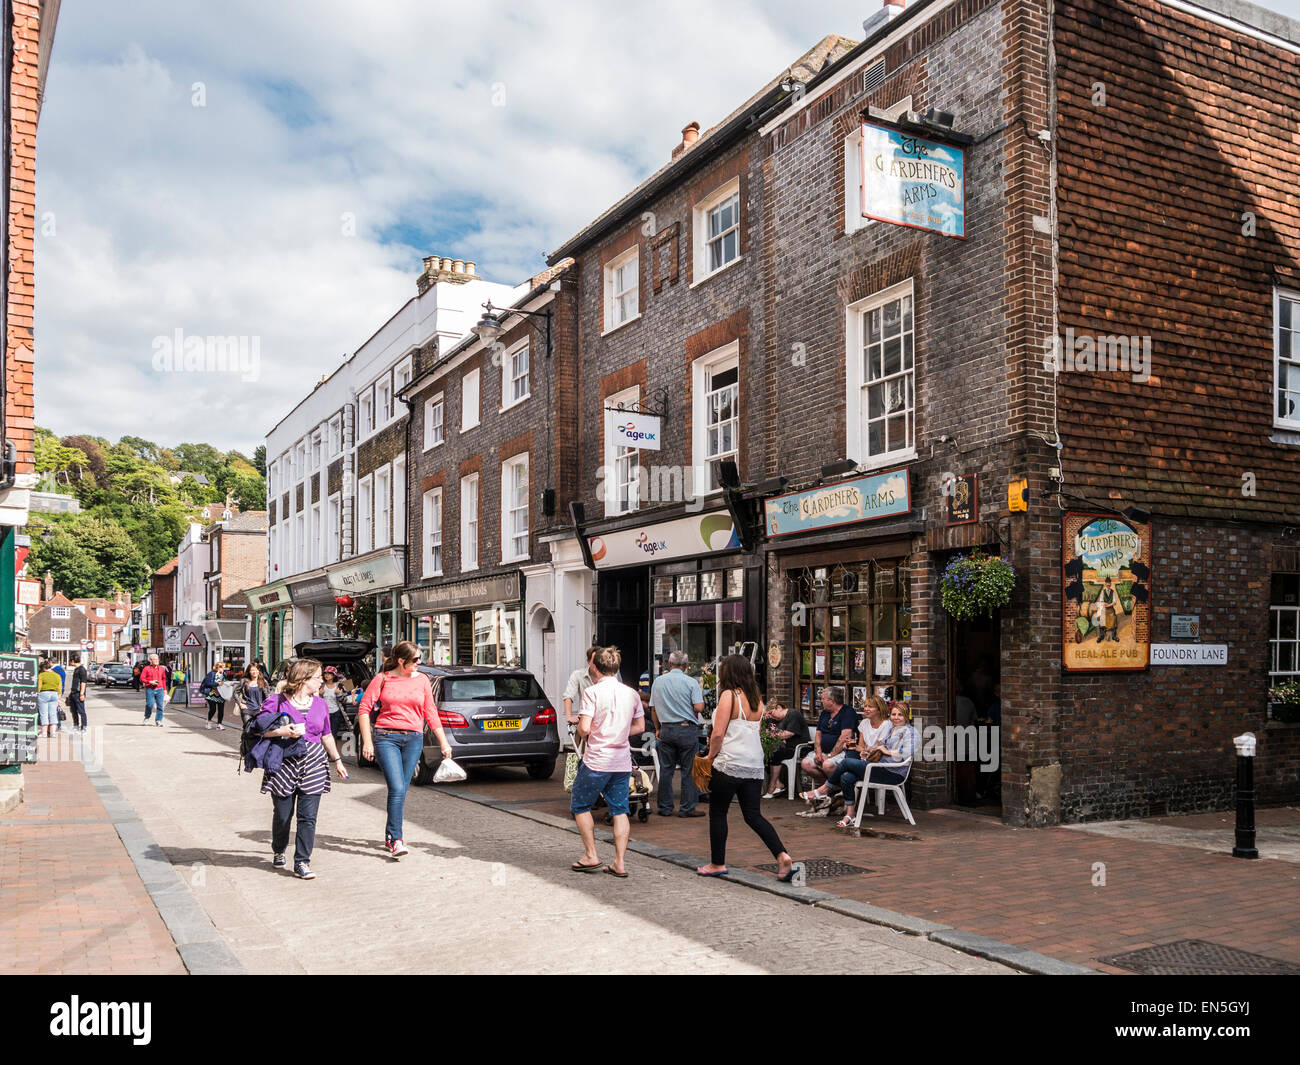 Cliffe High Street with the Gardeners Arms Public House, Lewes, East Sussex. Stock Photo